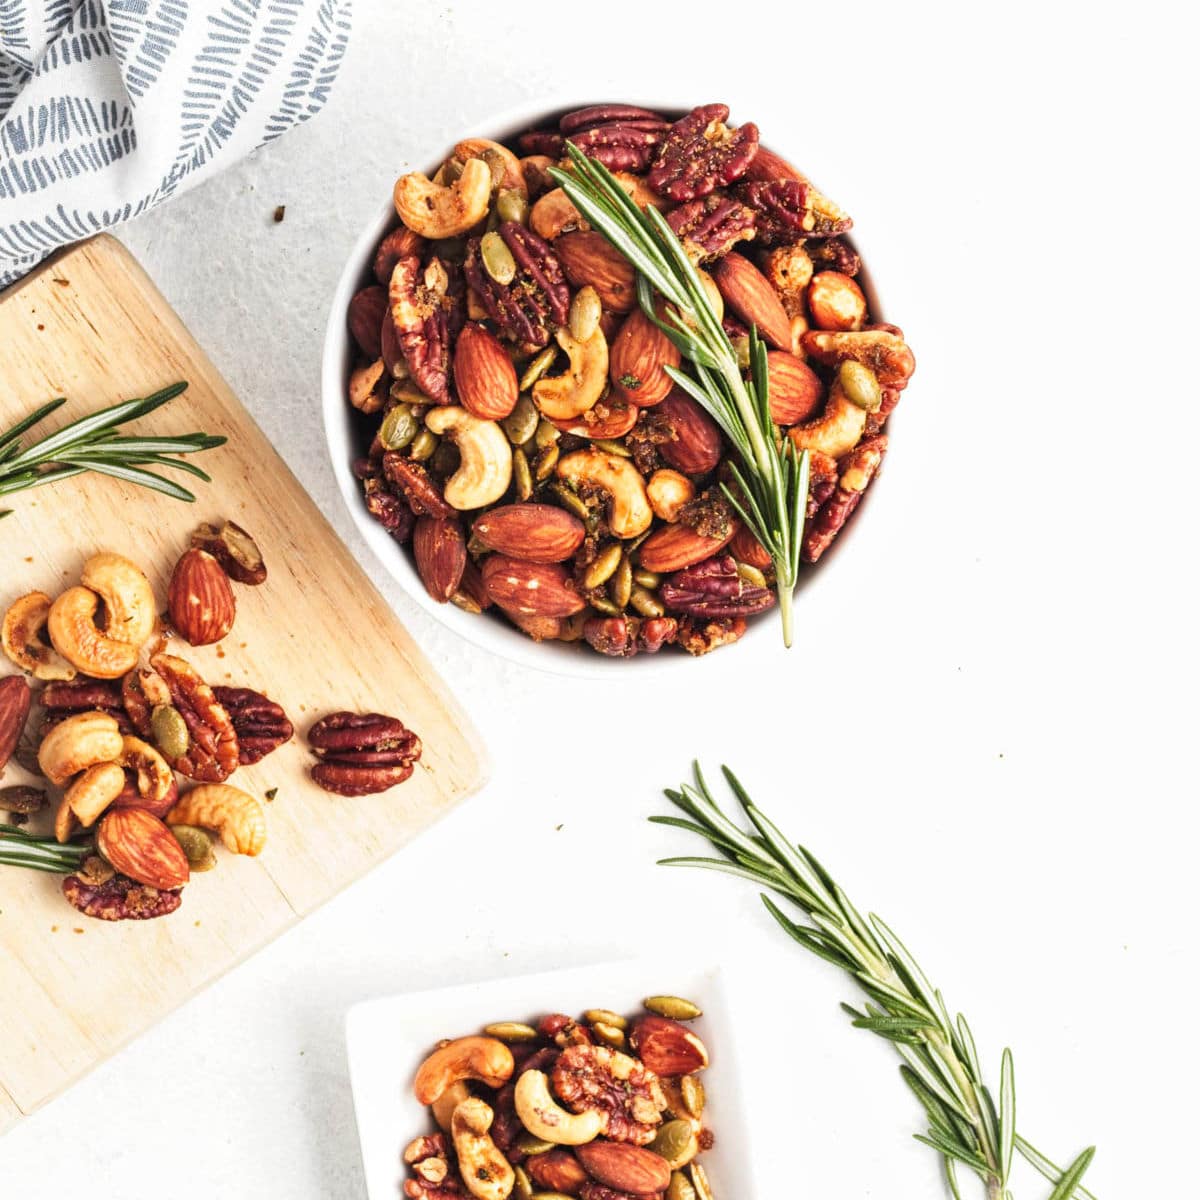 Best Nuts for a Charcuterie Board